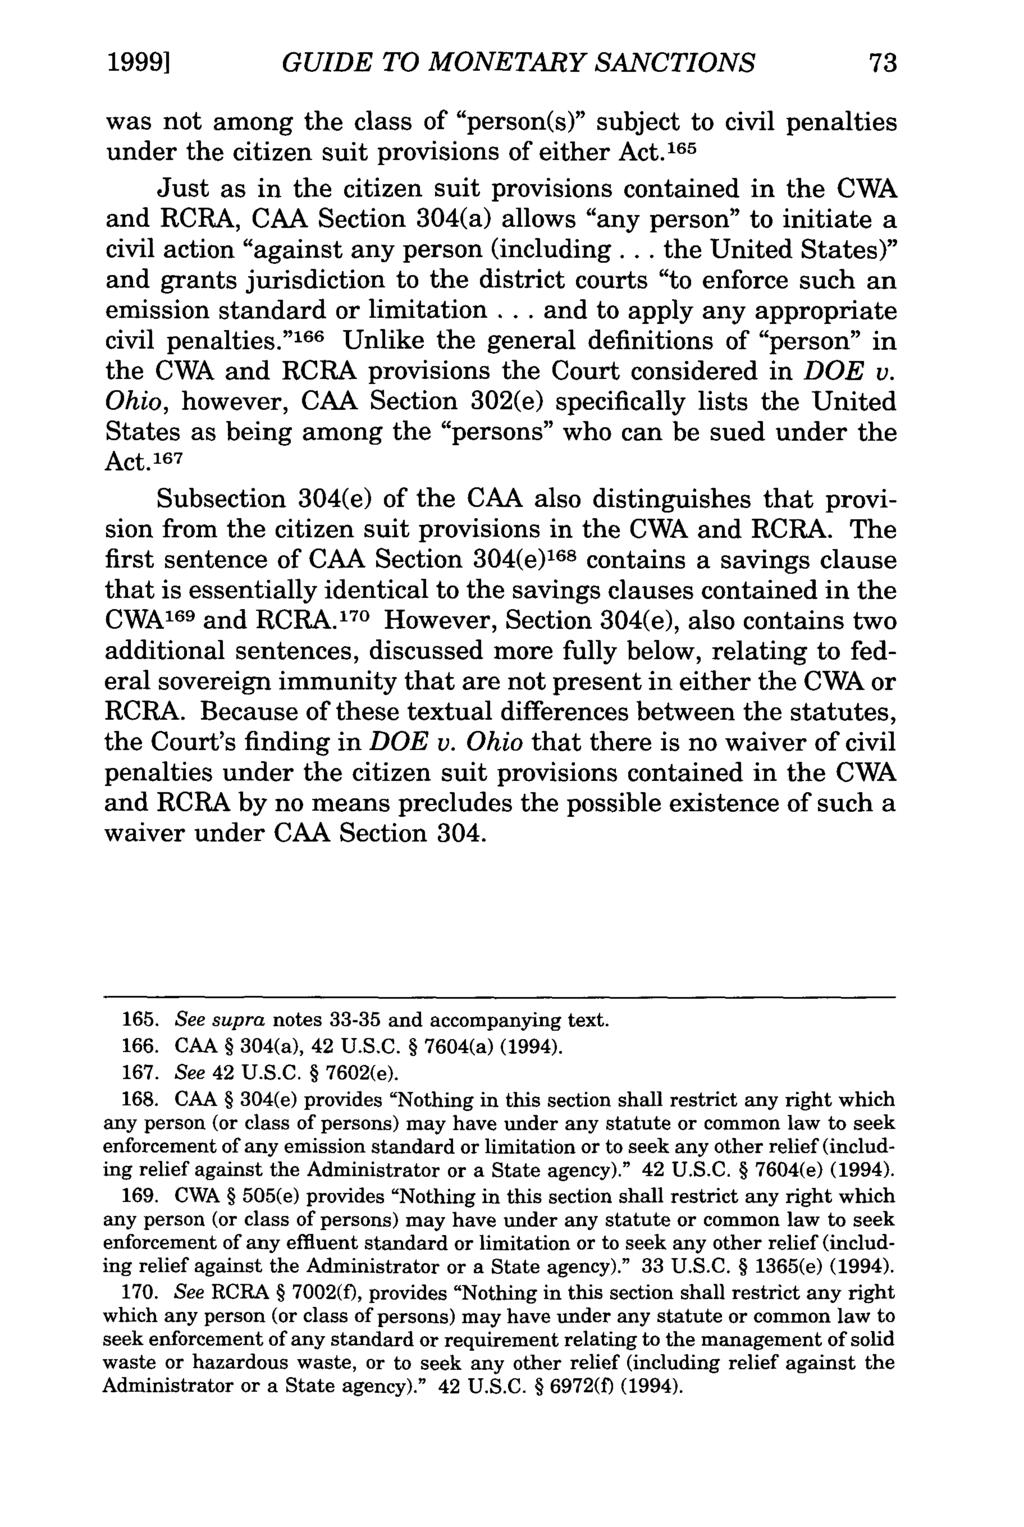 19991 GUIDE TO MONETARY SANCTIONS was not among the class of "person(s)" subject to civil penalties under the citizen suit provisions of either Act.